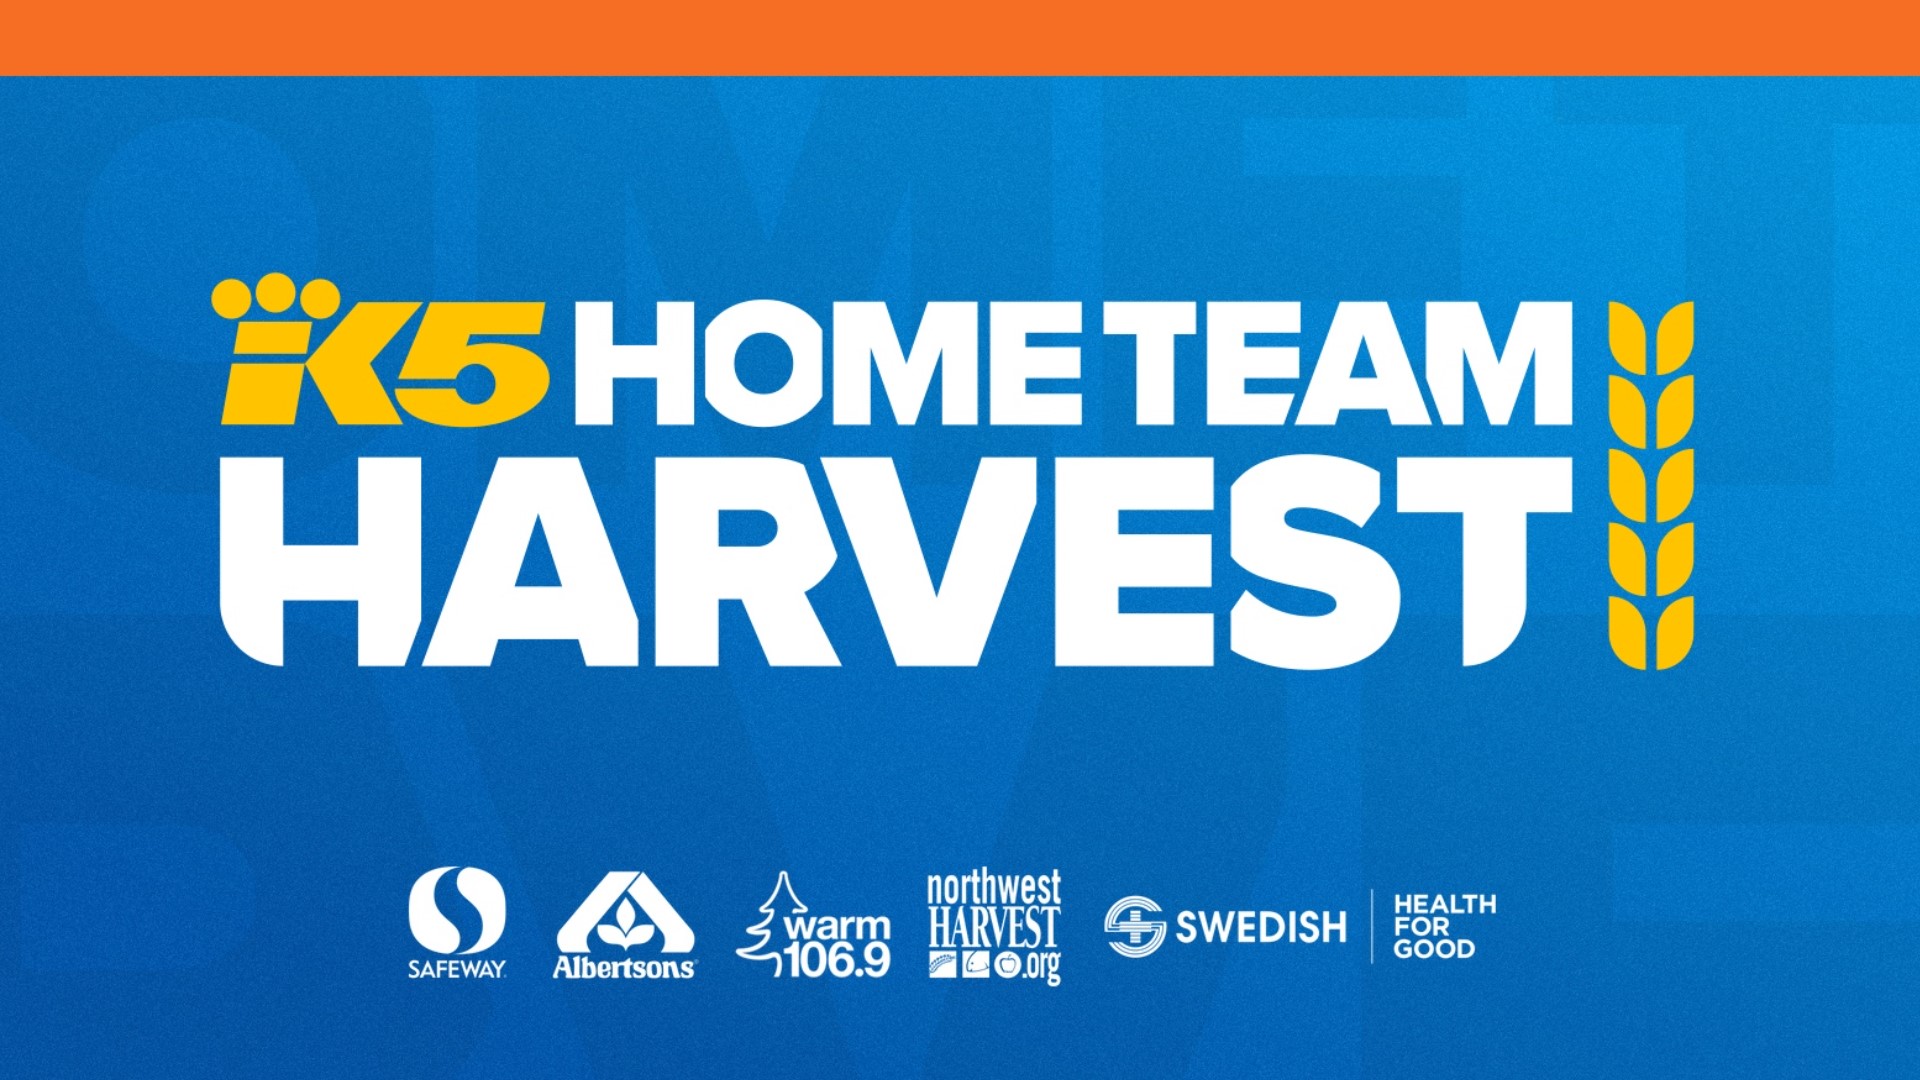 The broadcast special highlights the Home Team Harvest campaign, which aims to raise 21 million meals, and how it changes lives in our communities.